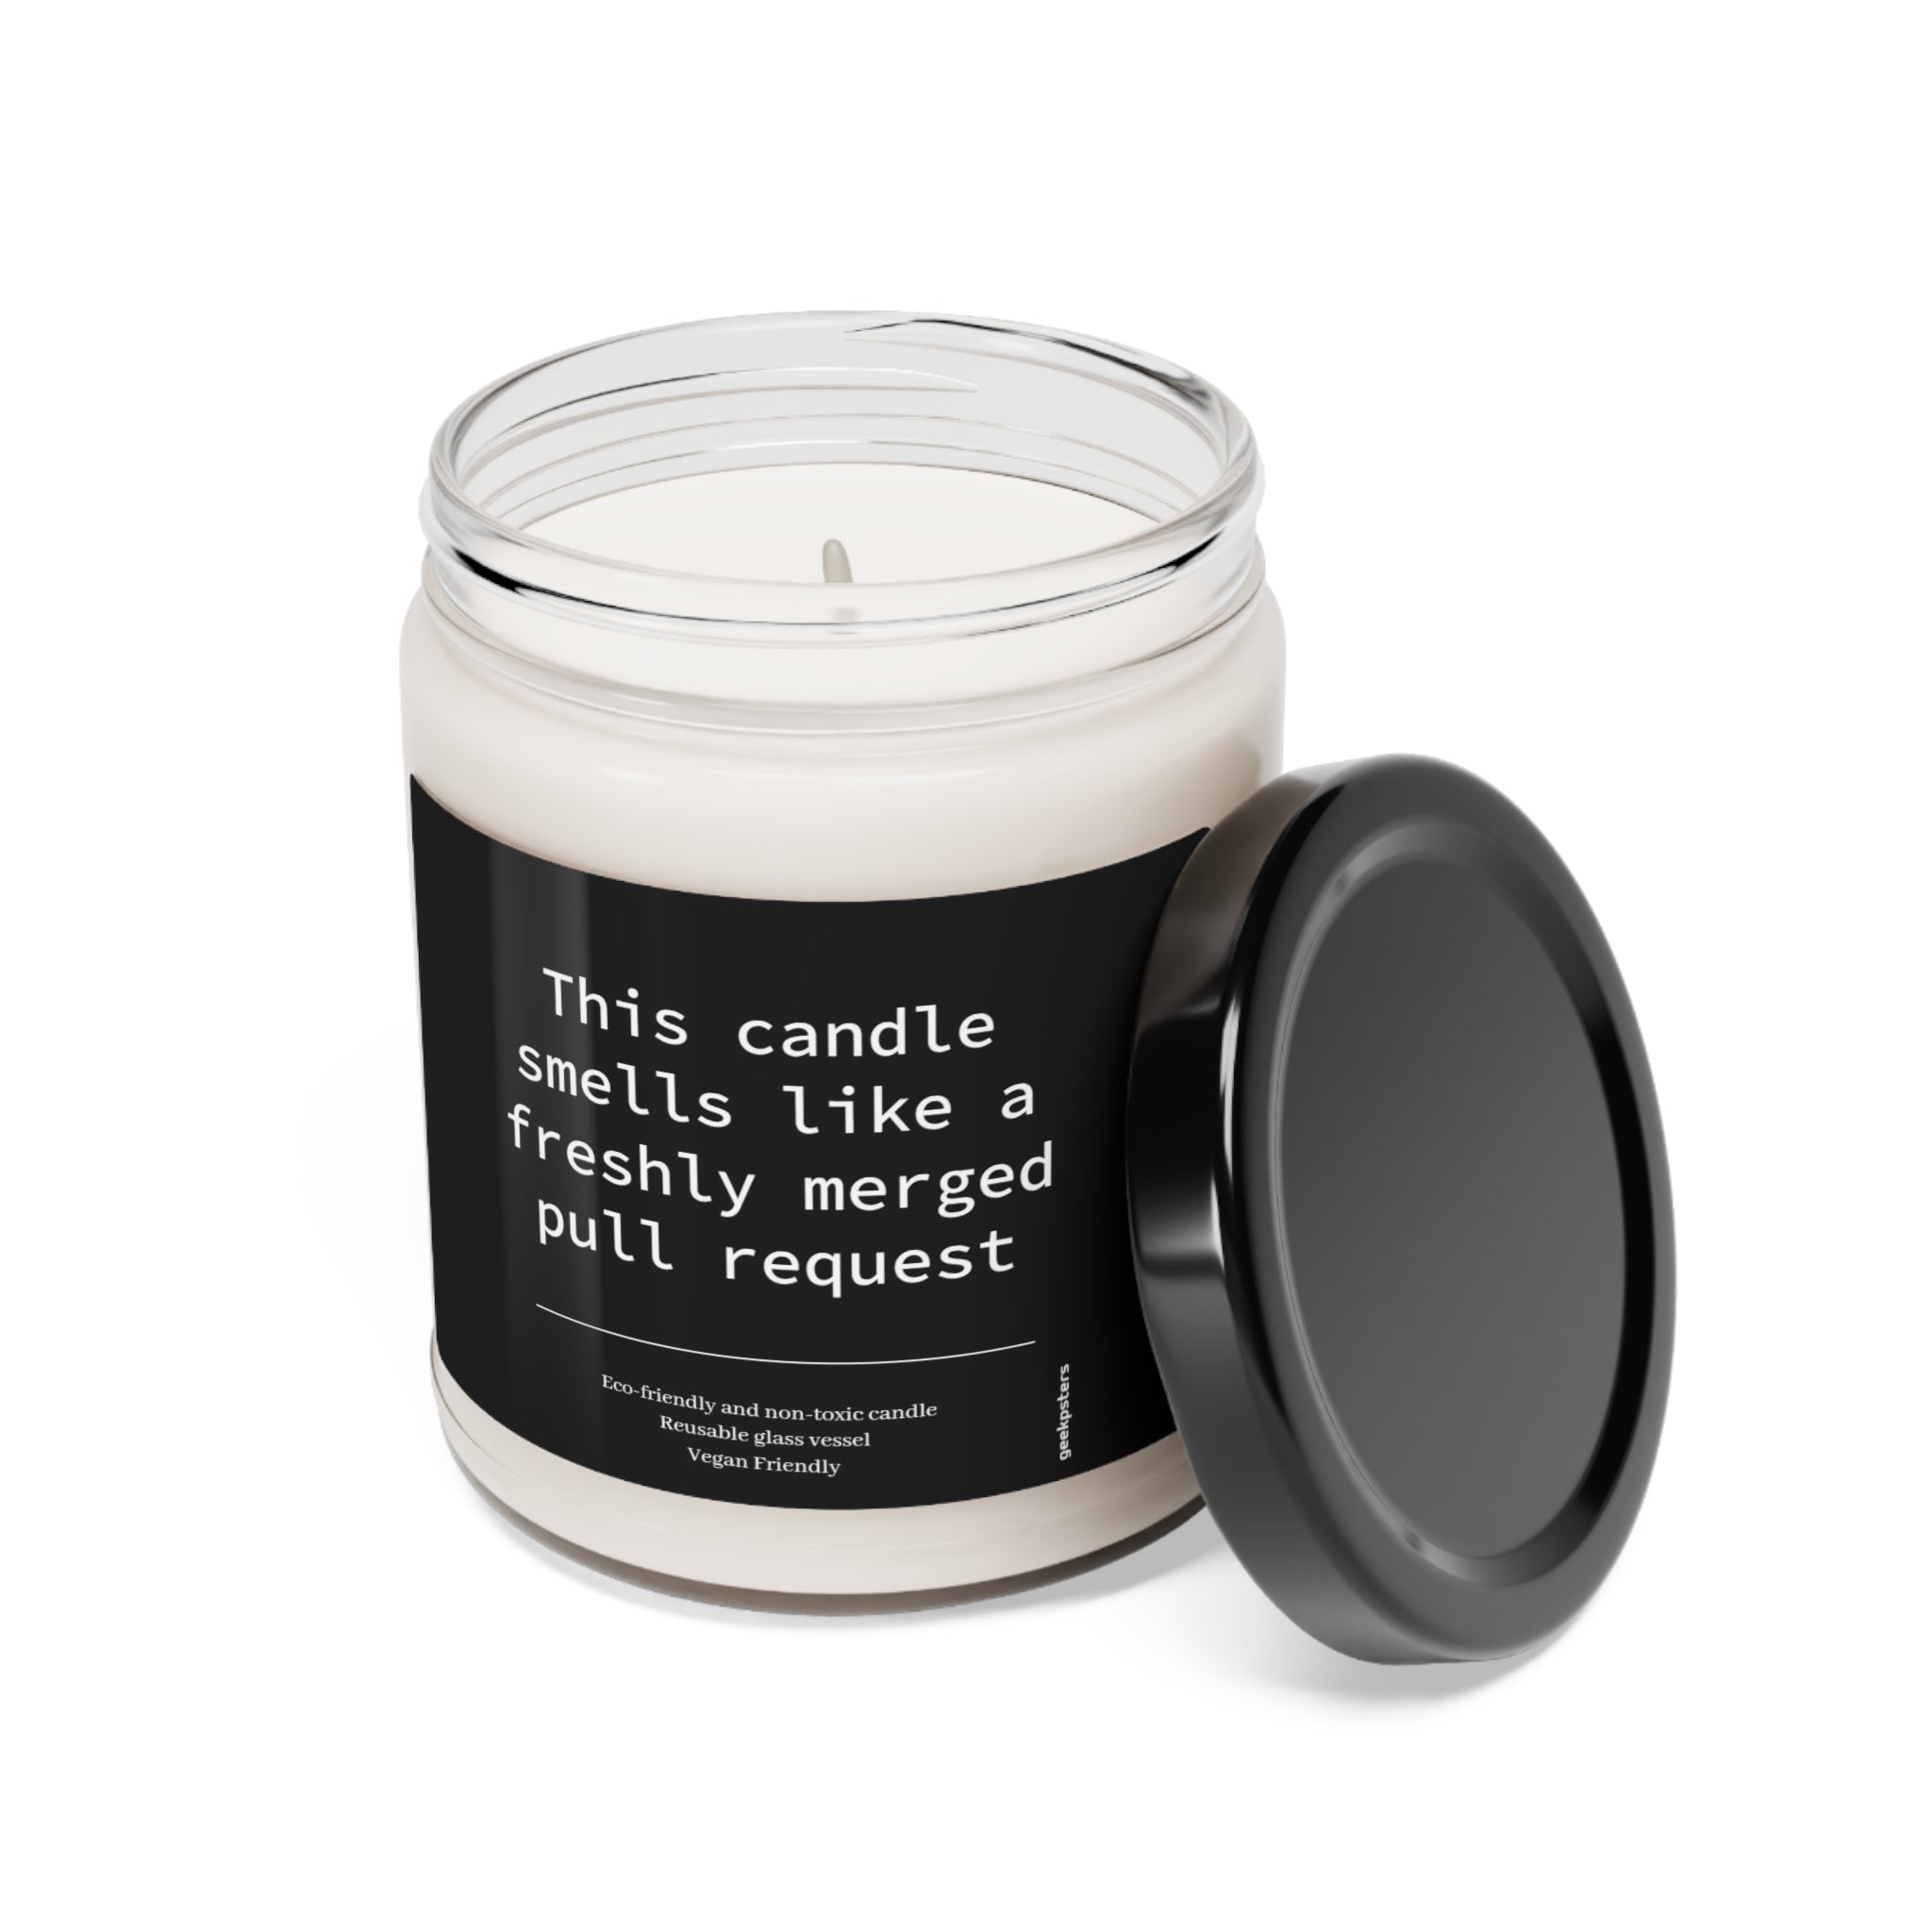 A scented candle with the label "This Candle Smells Like a Freshly Merged Pull Request," featuring a natural soy wax blend and cotton wick.